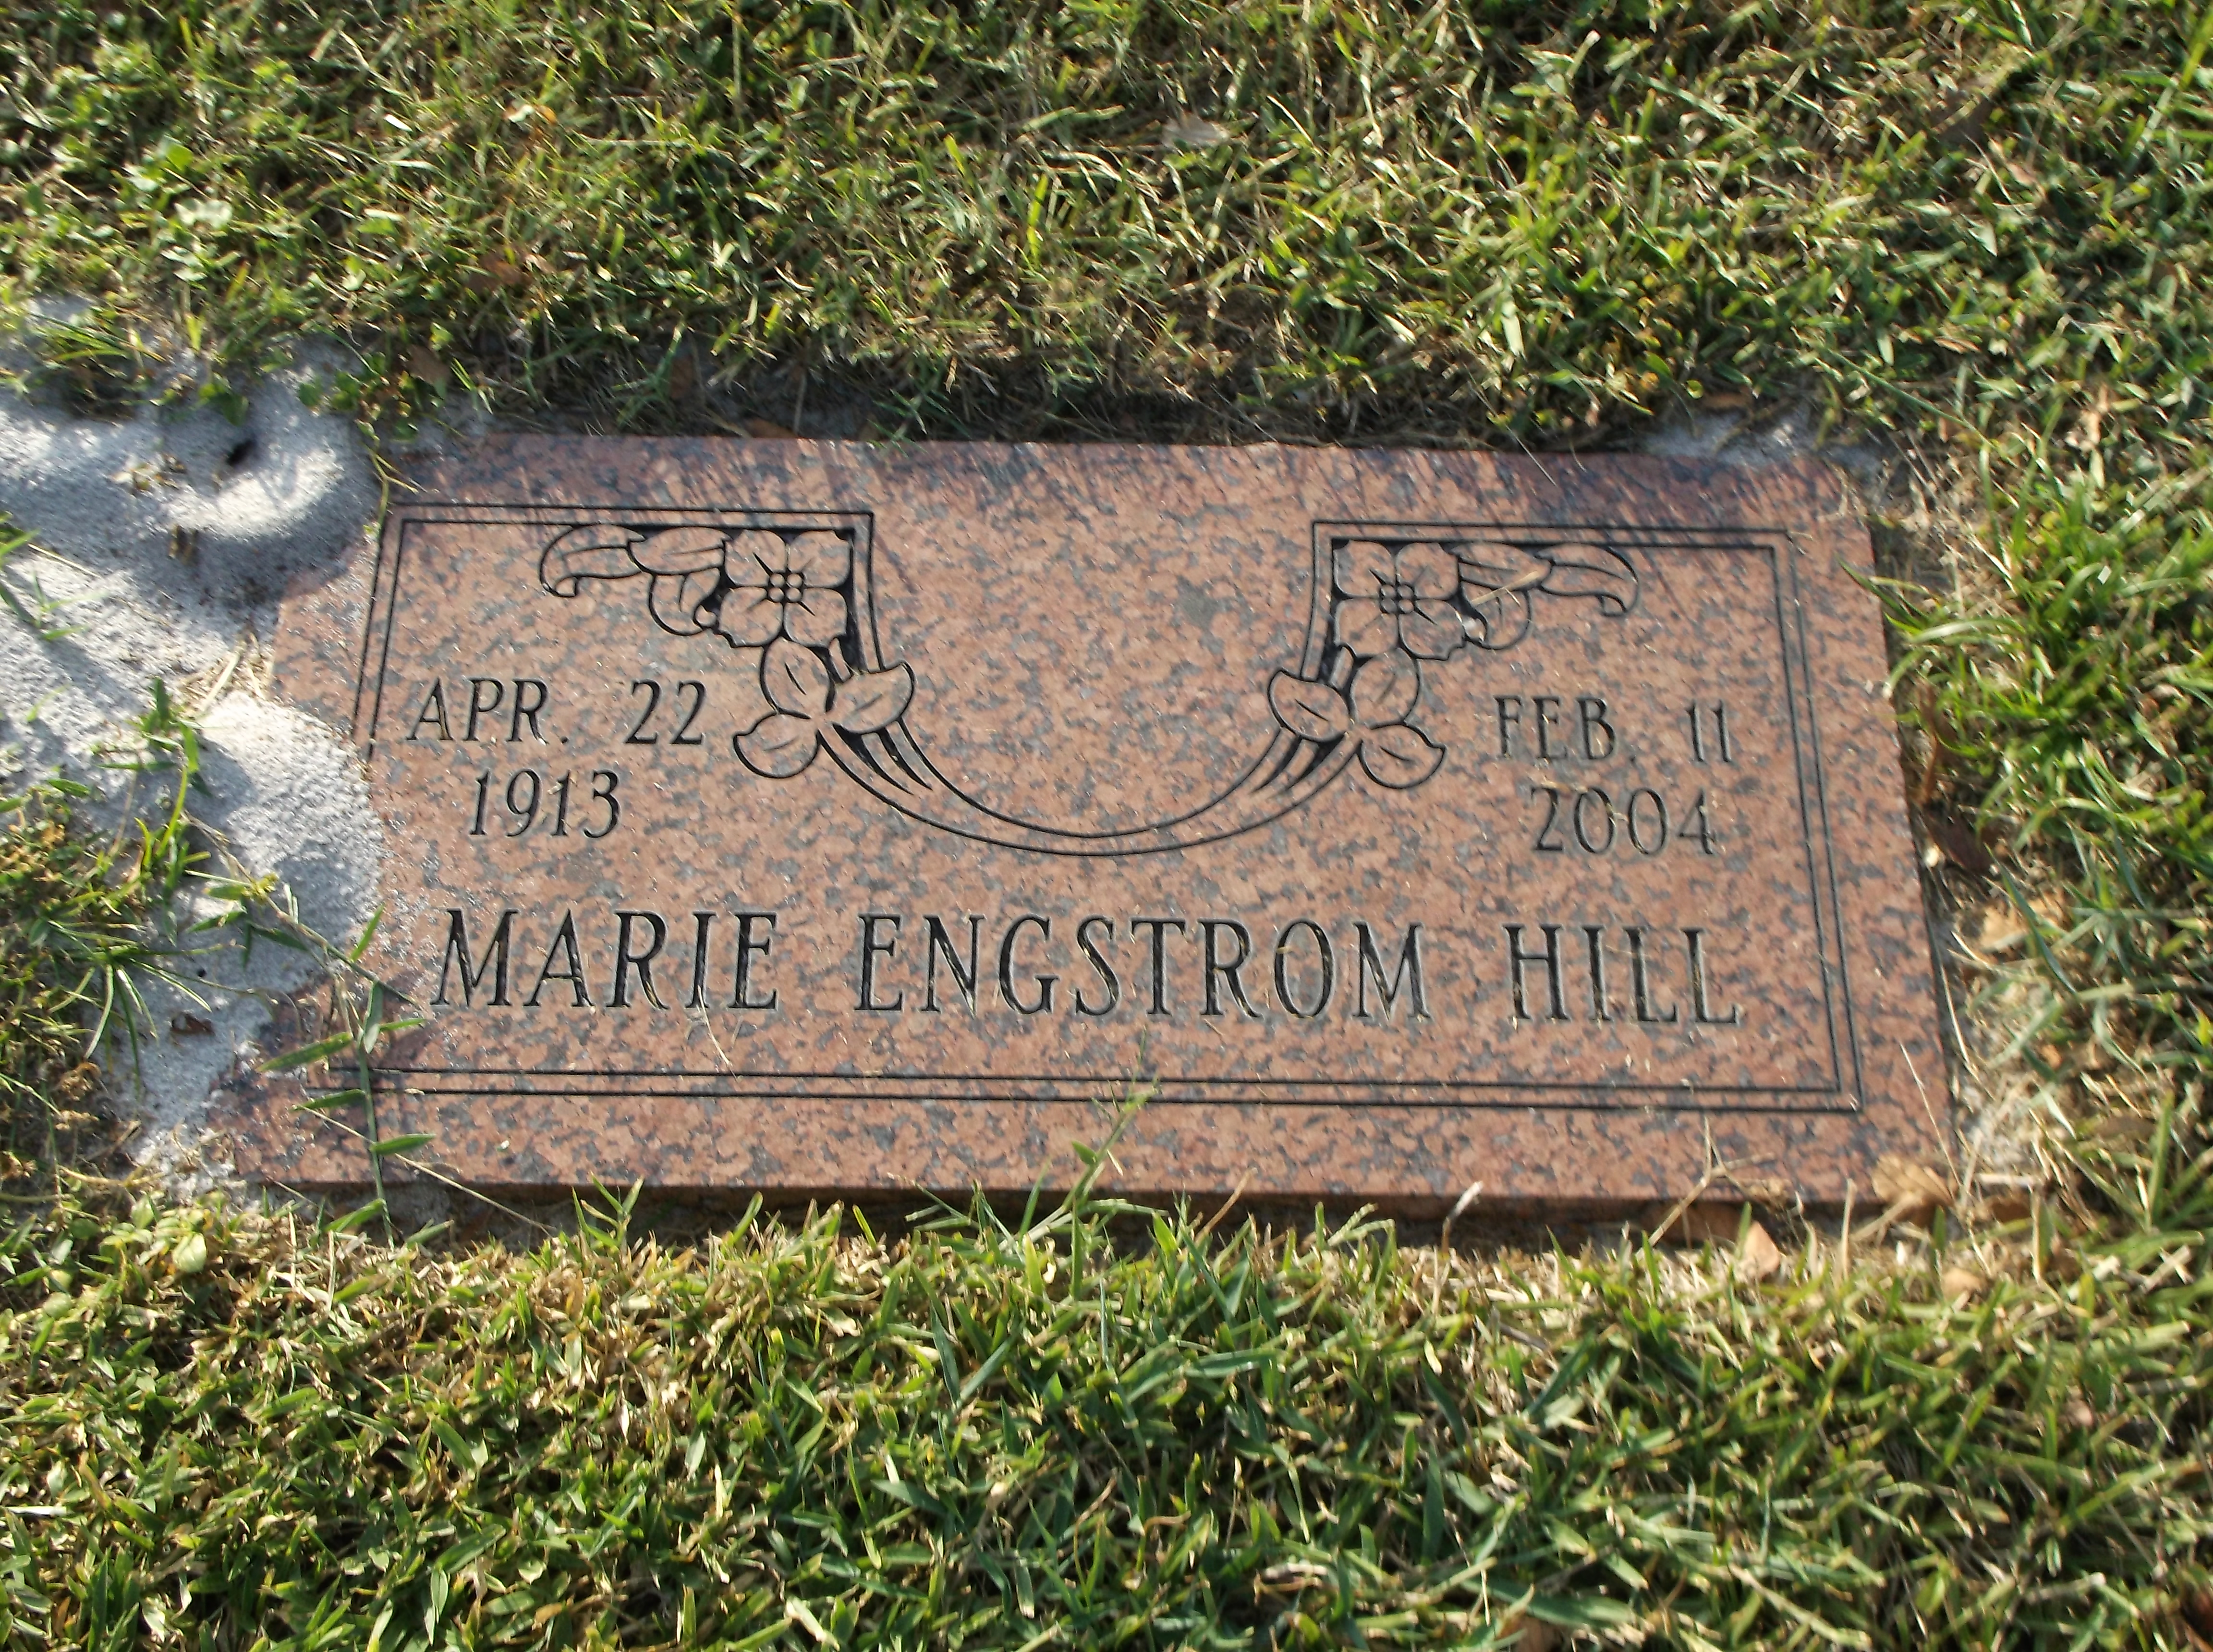 Marie Engstrom Hill